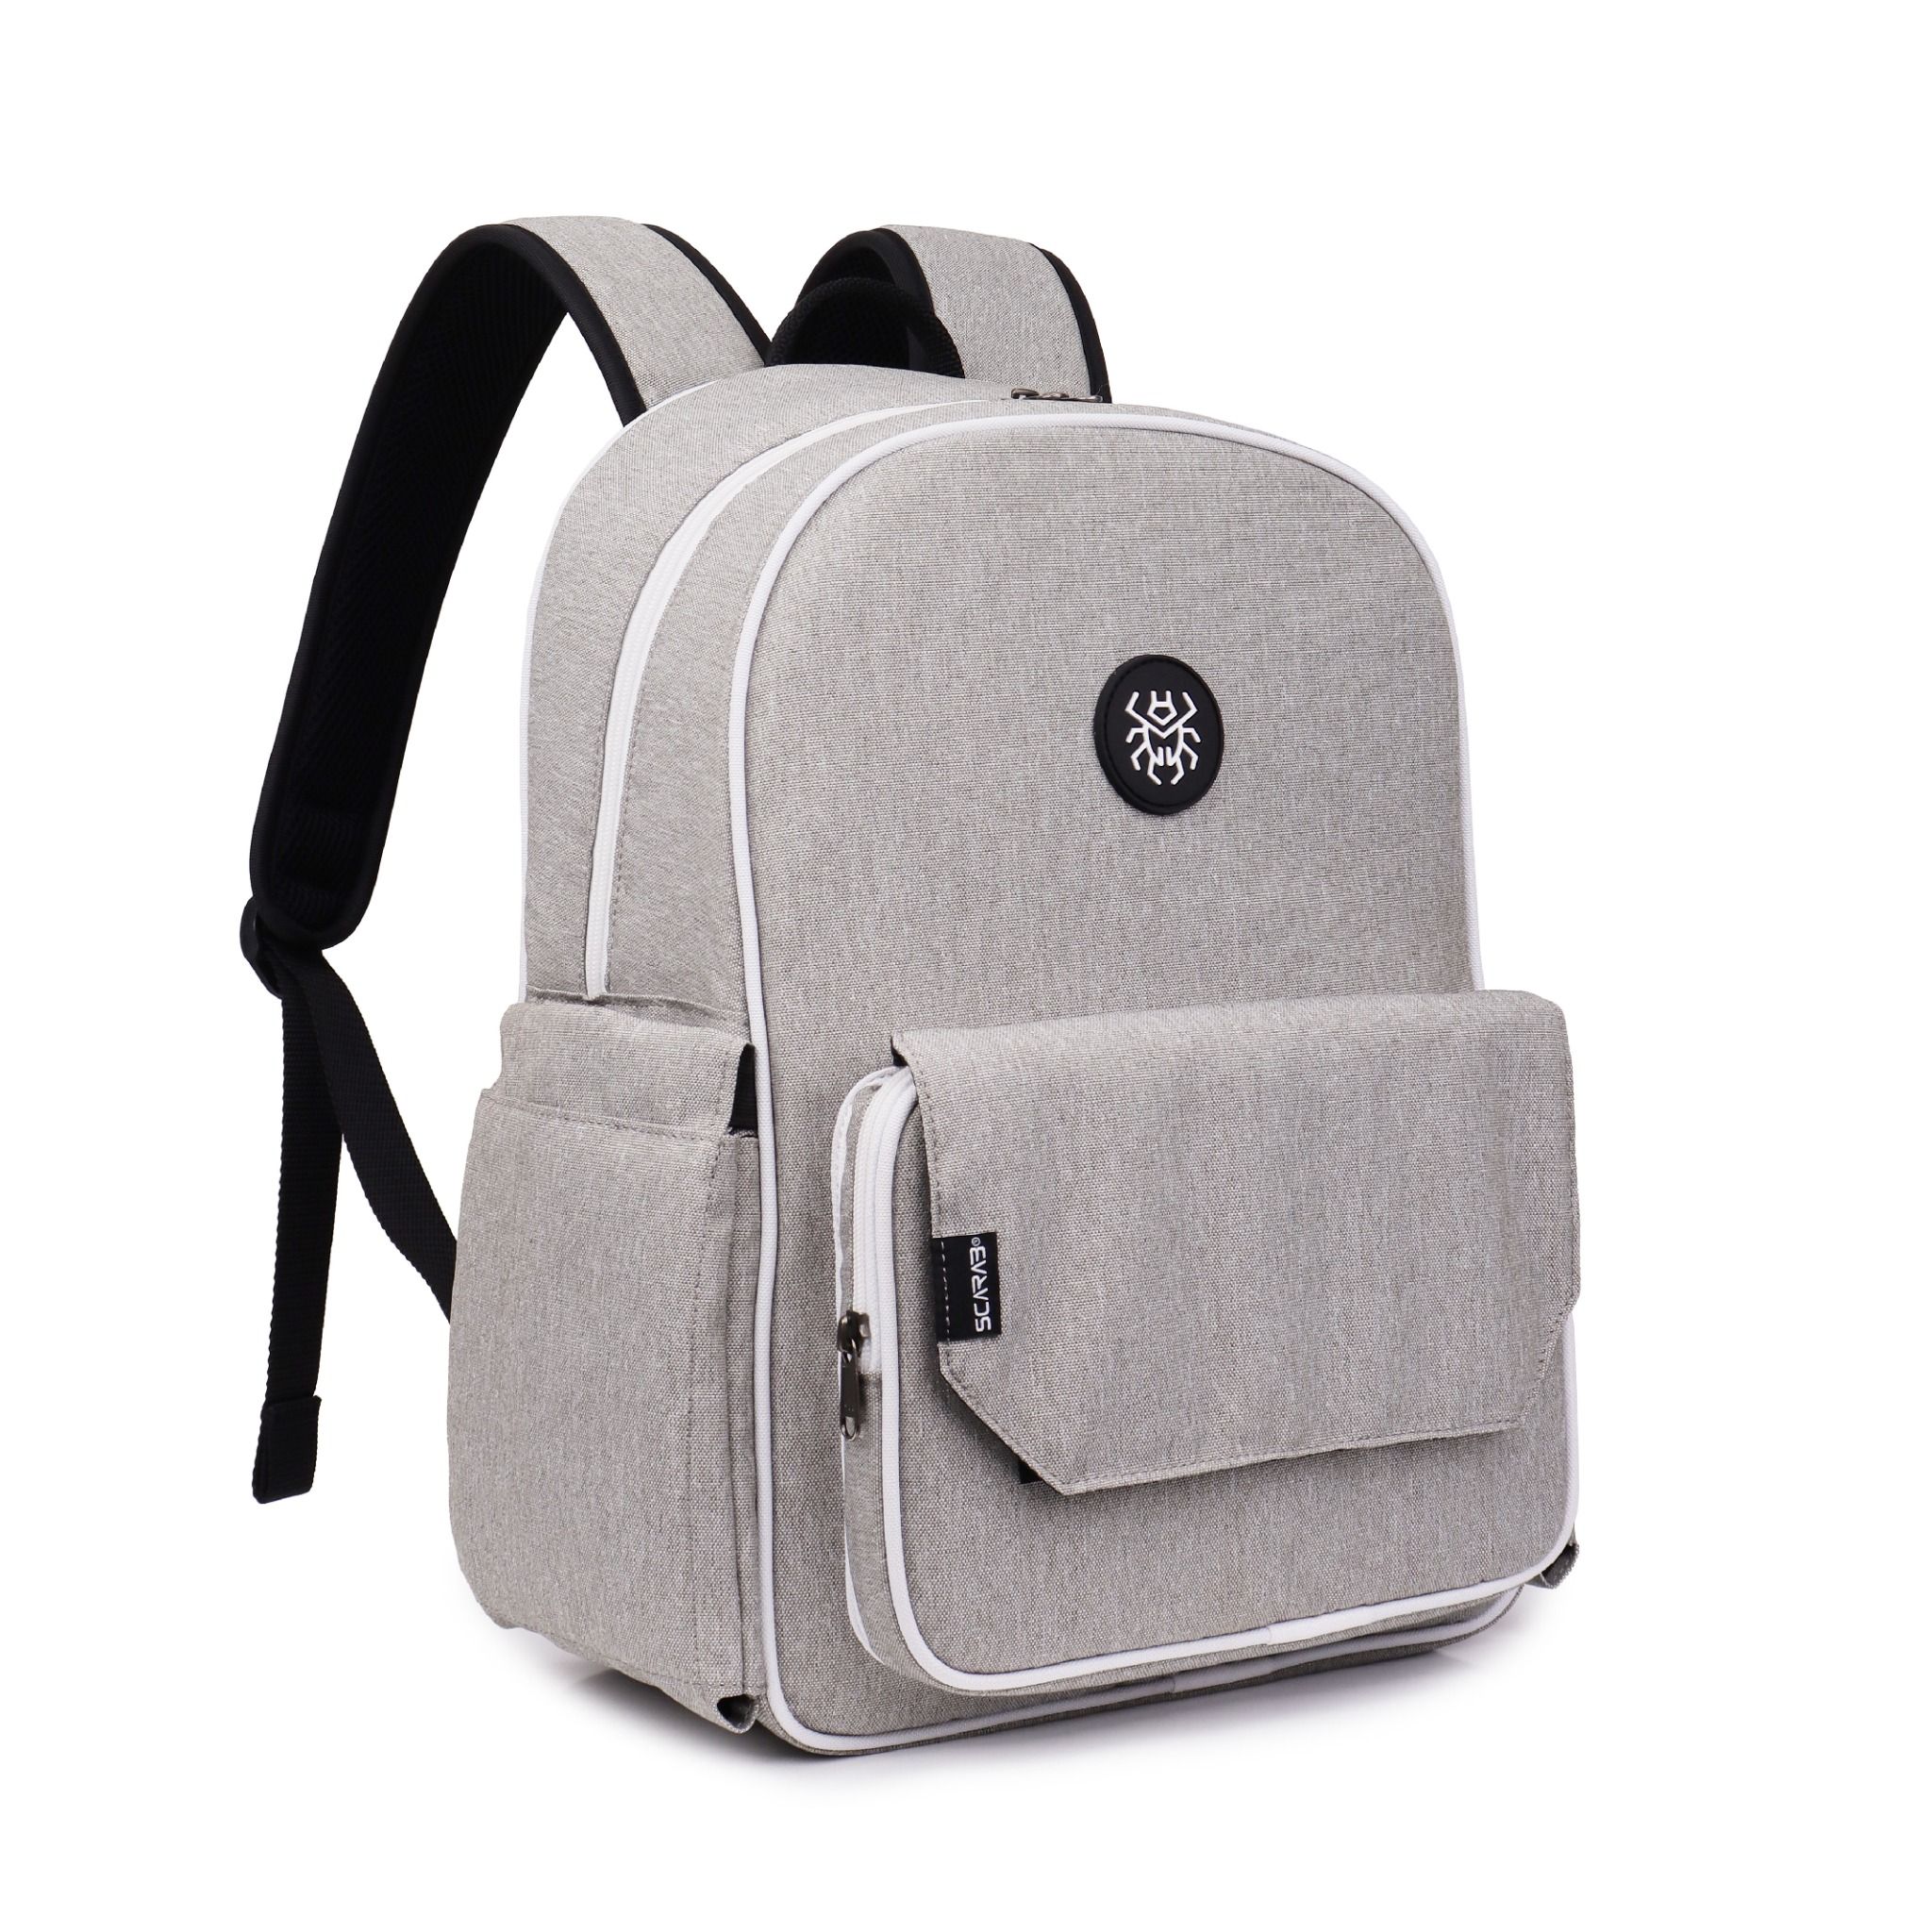  Daypack Backpack - Pale Silver 